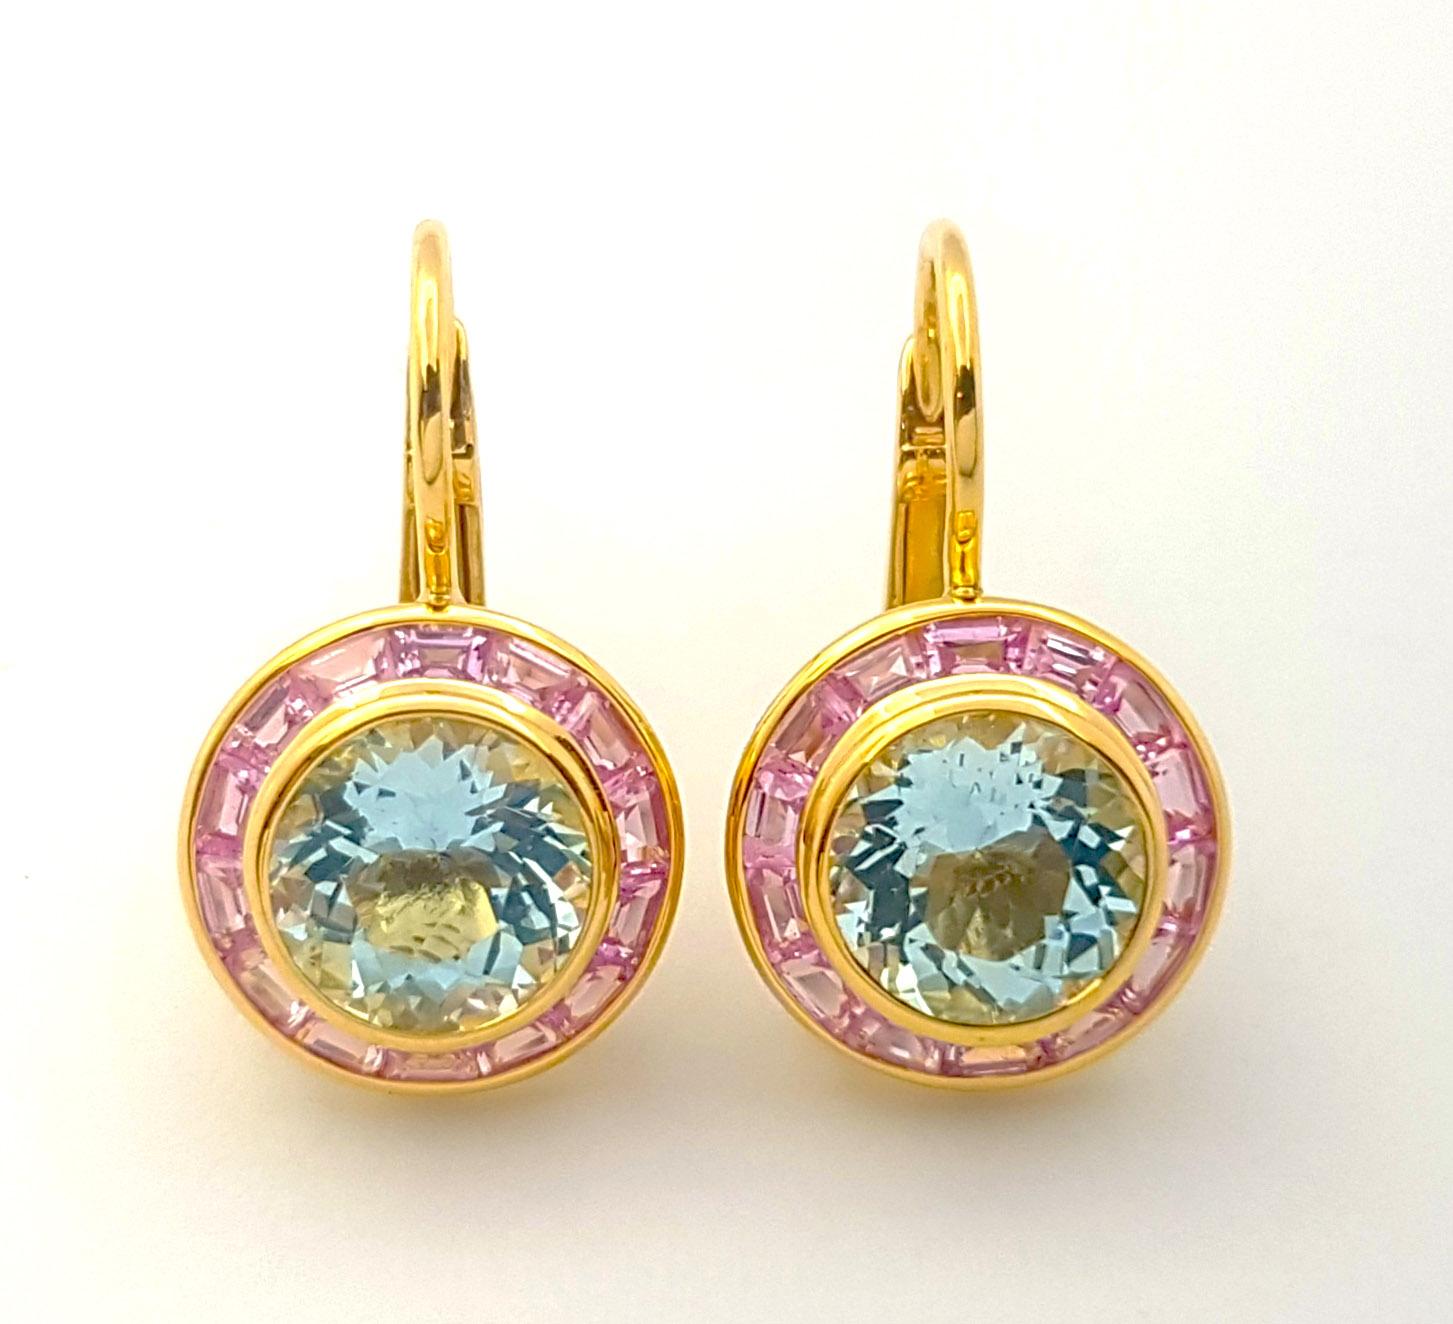 Aquamarine 3.63 carats with Pink Sapphire 1.30 carats Earrings set in 18K Gold Settings

Width: 1.2 cm 
Length: 2.1 cm
Total Weight: 6.39 grams

